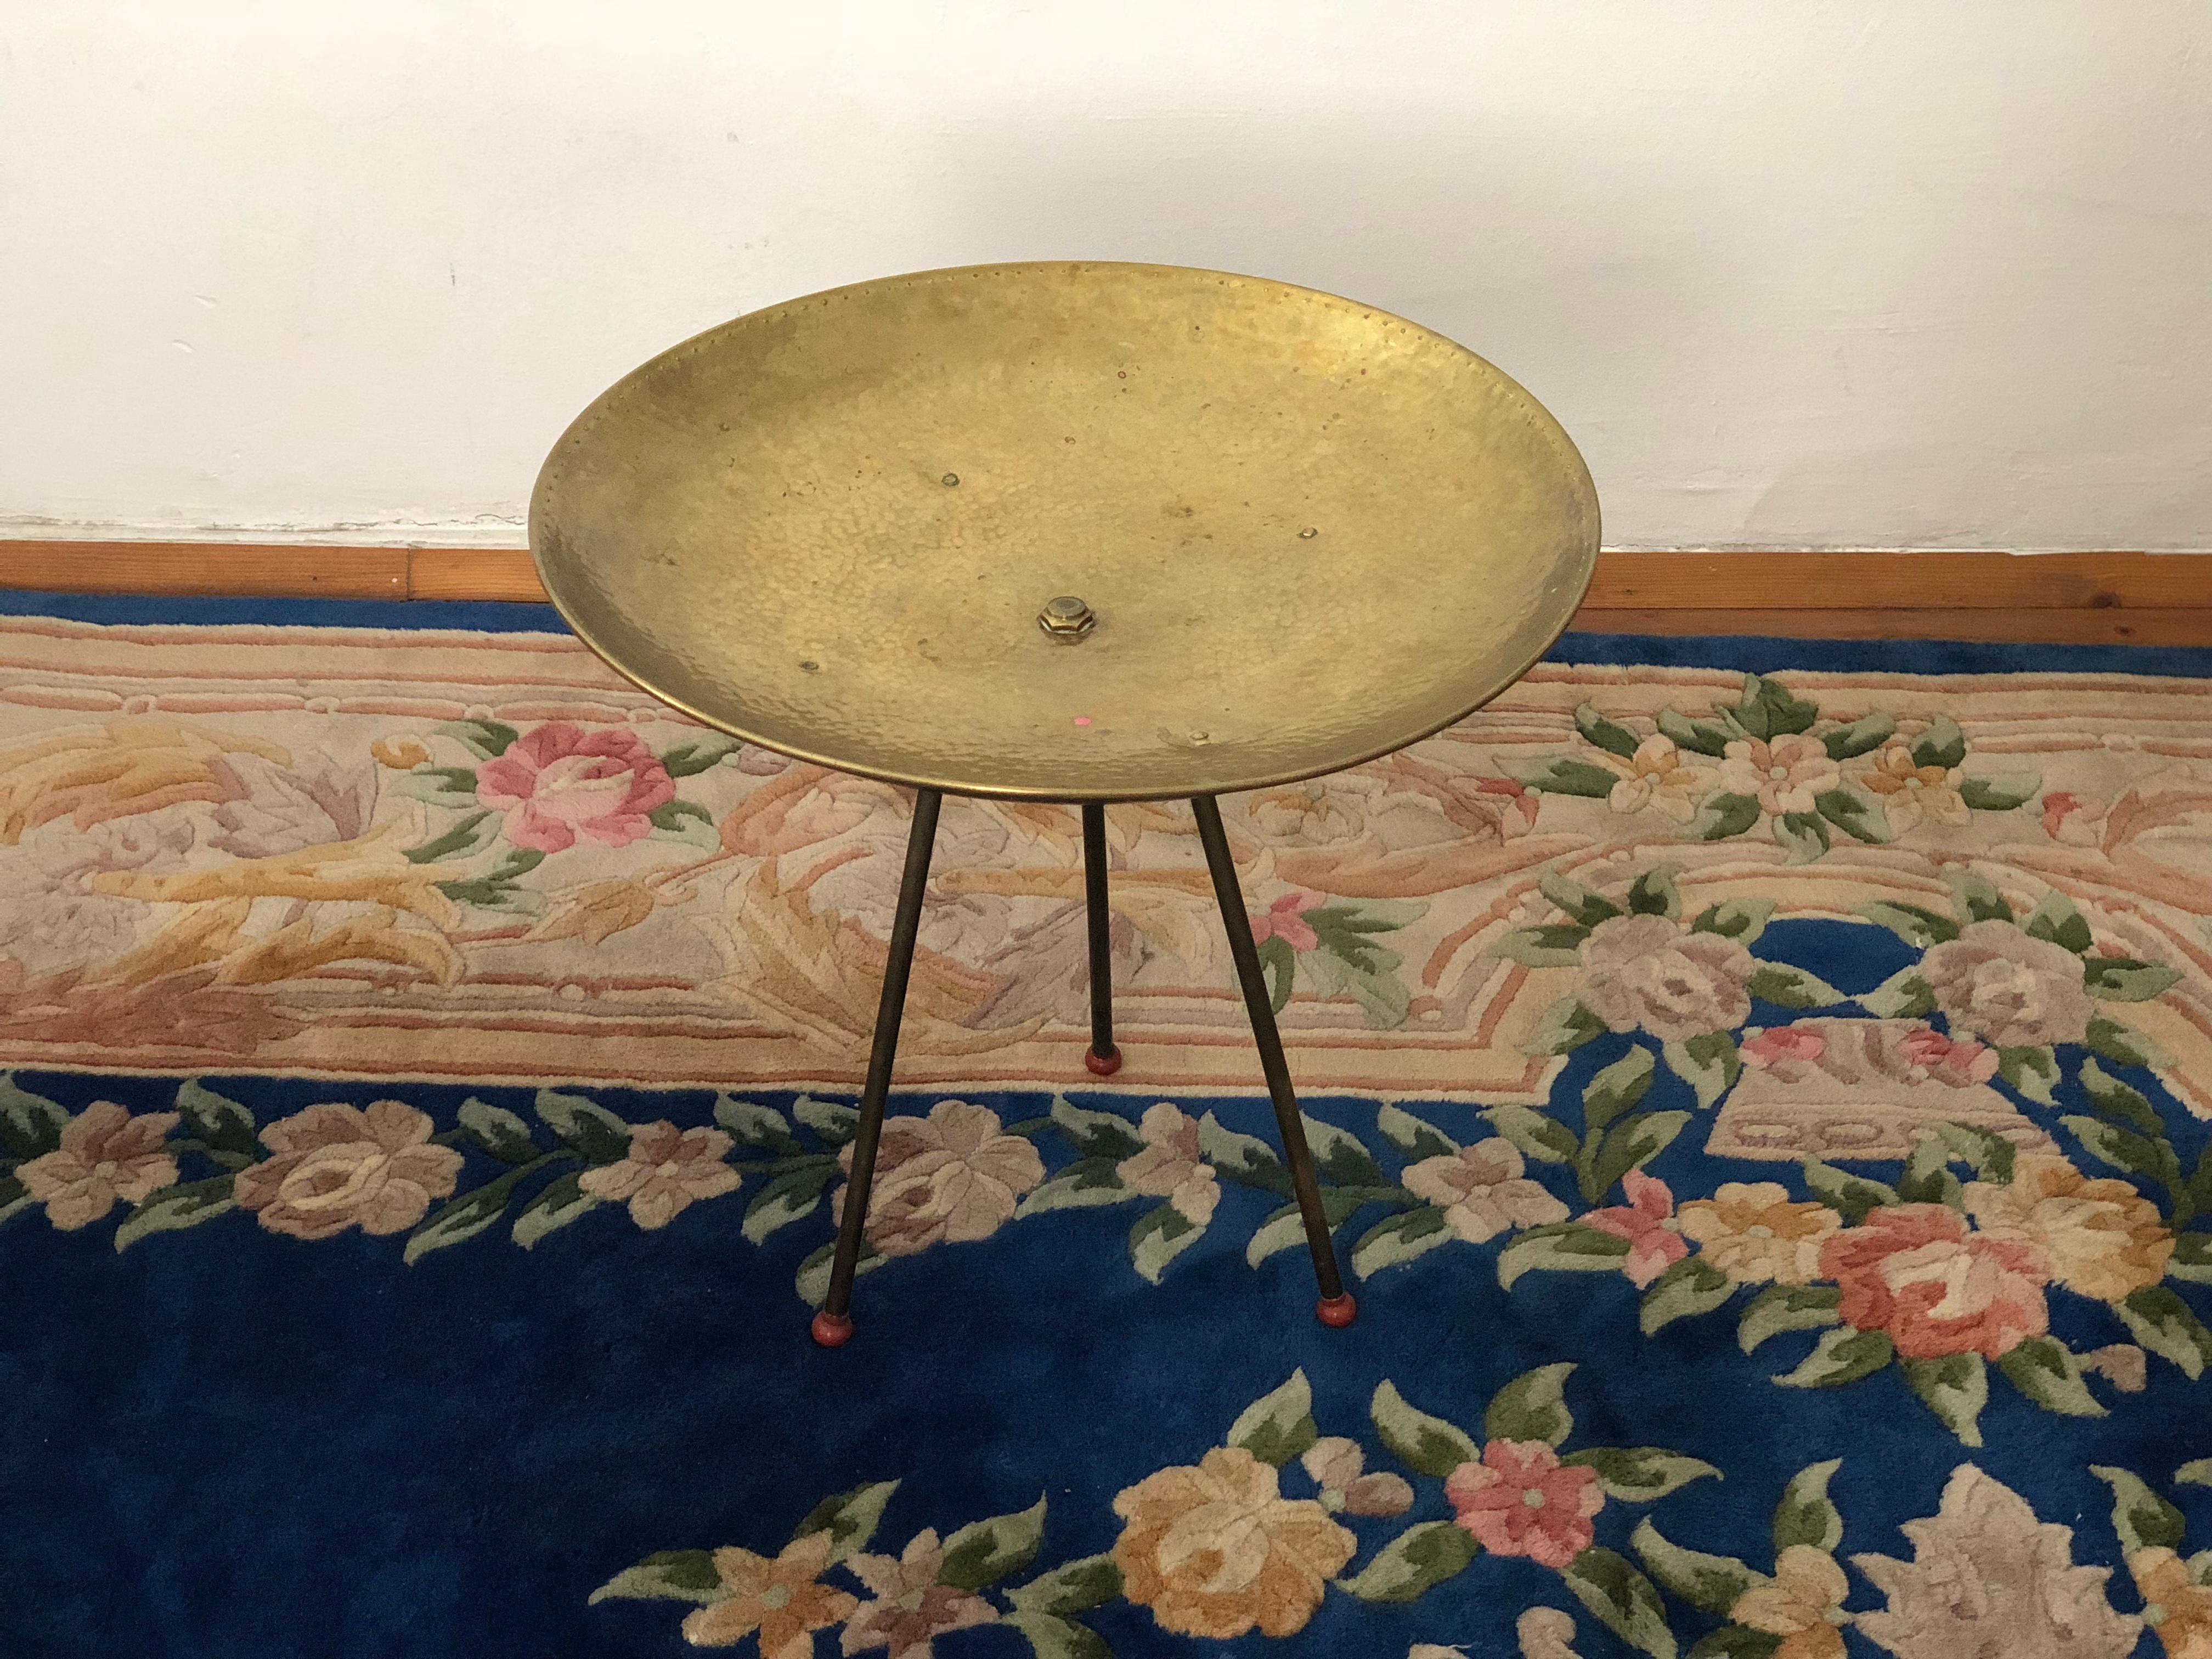 We would love to discover who actually designed this beautiful brass side table in bowl shape. It is so adoring and functional! Regardless of attribution this table is wonderful.
It is made out of hammered brass and stands on three legs with red